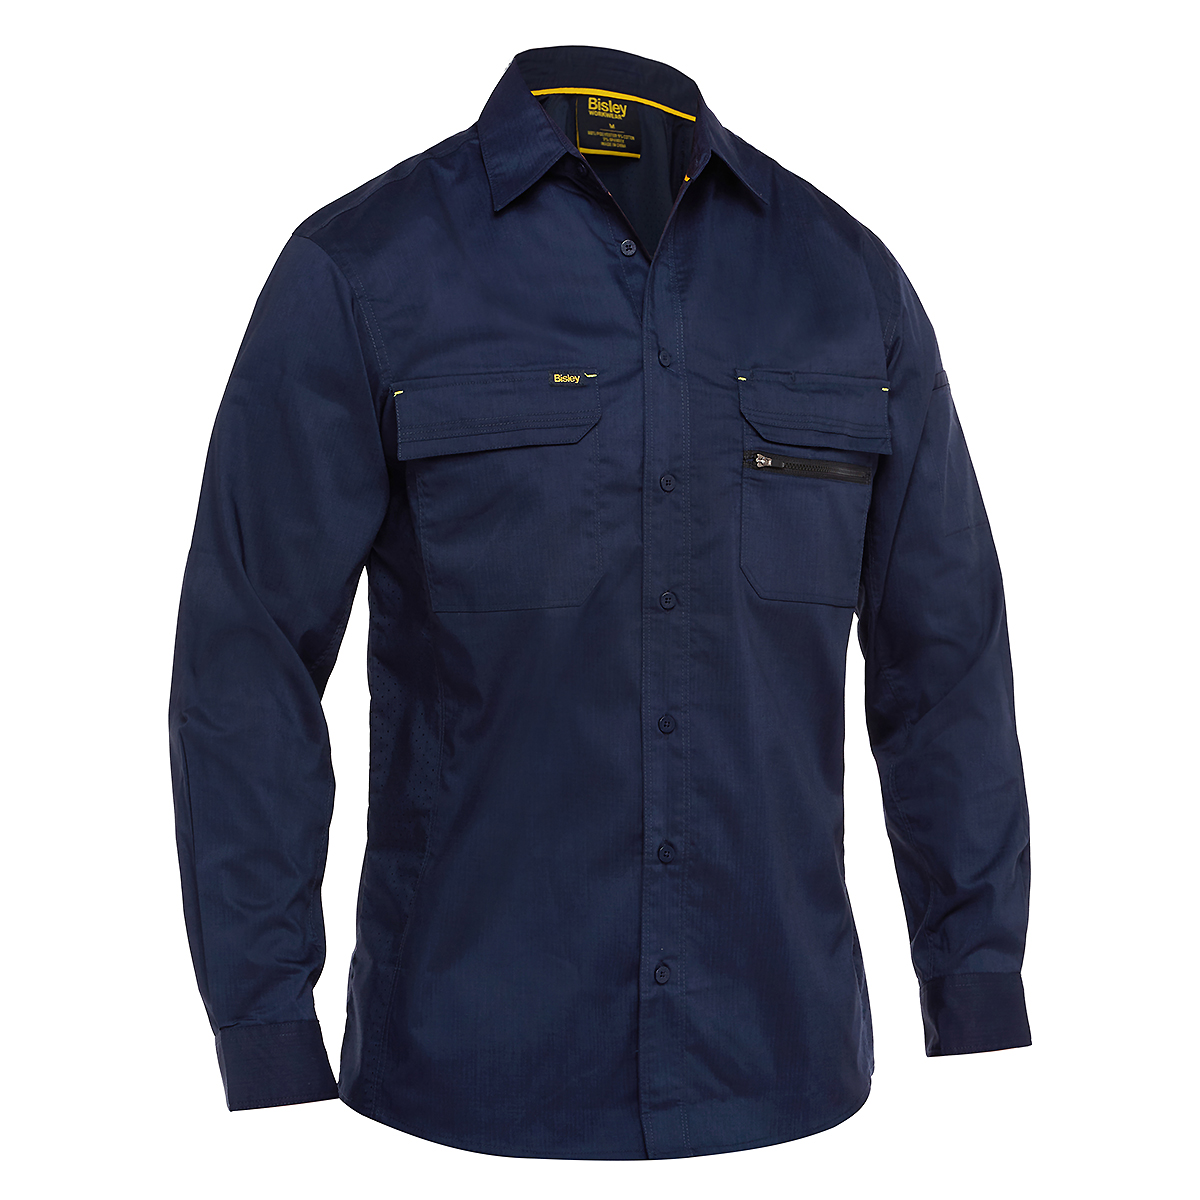 Bisley X Airflow Stretch Ripstop Shirt BS6490 - The Workers Shop